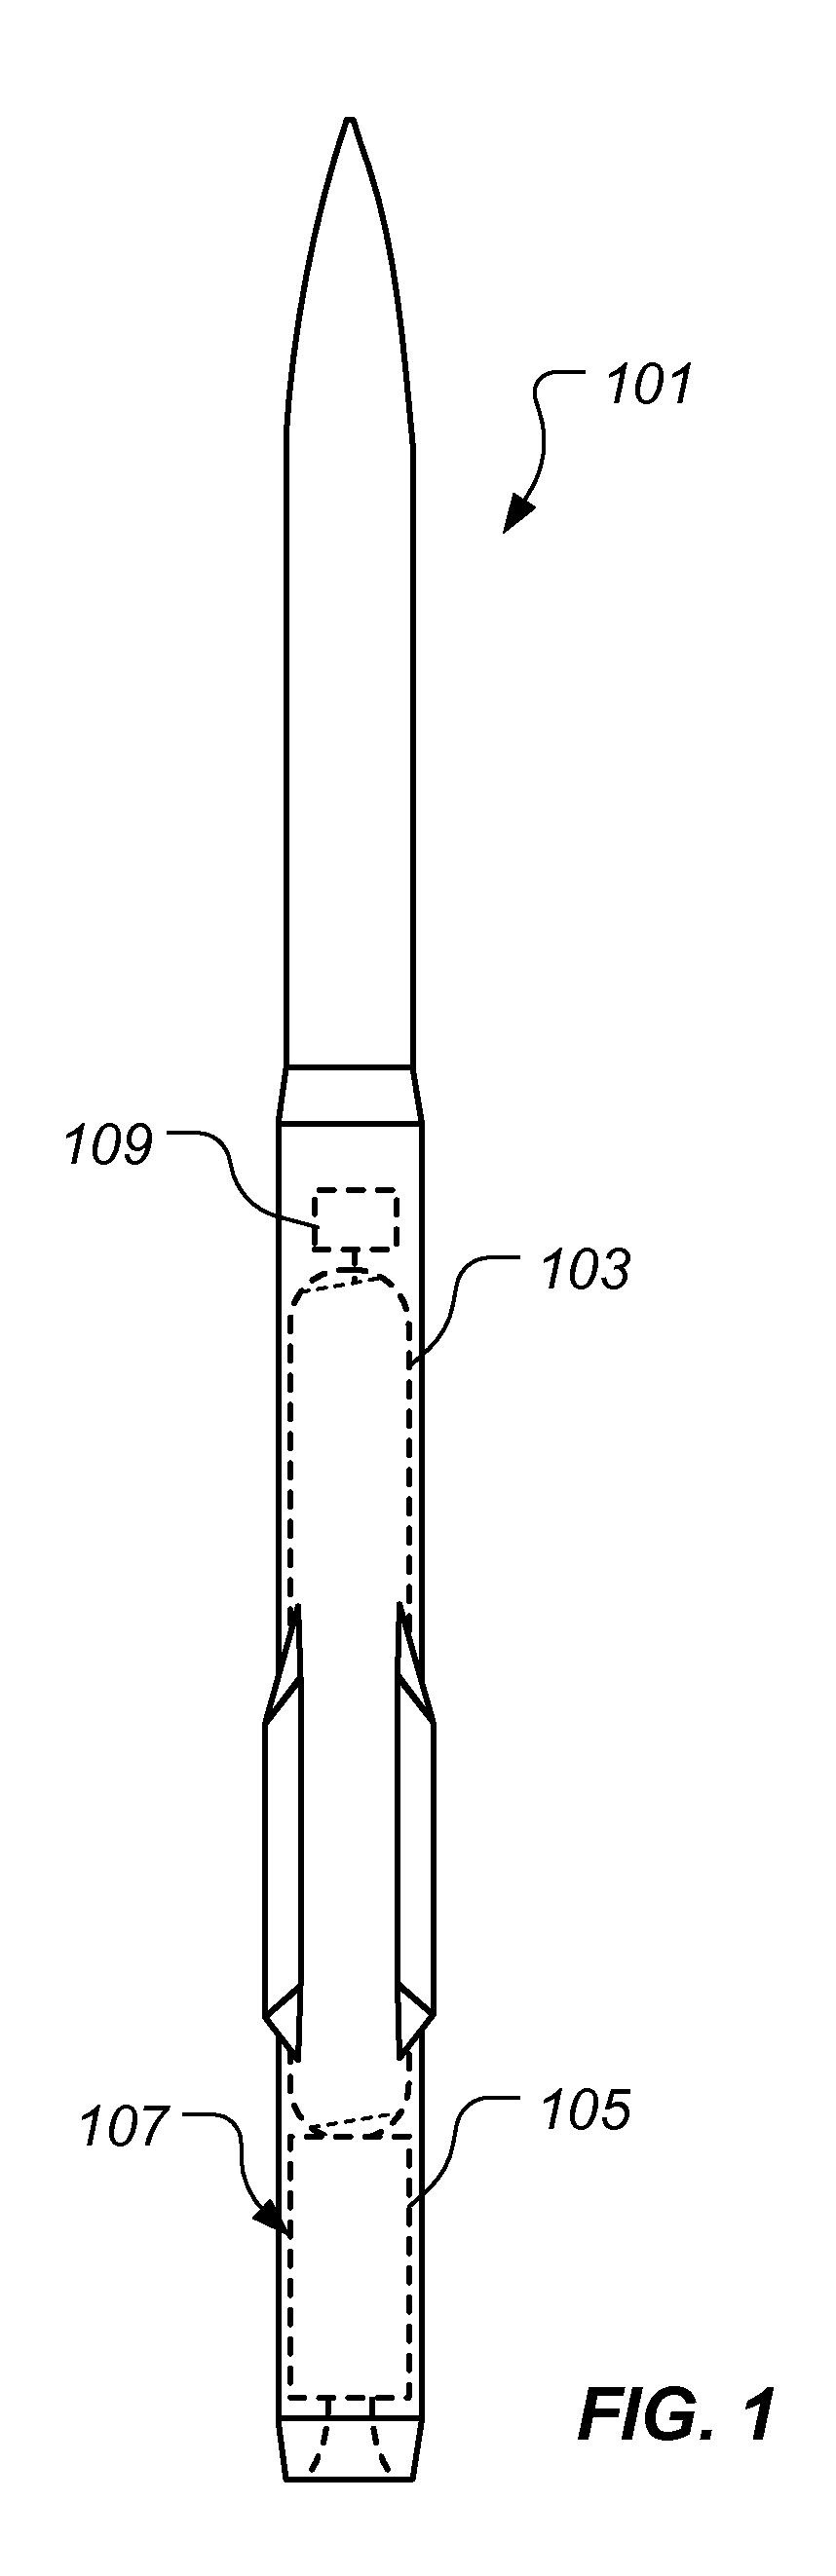 Impact-Sensing Thermal Insulation System and Missile Incorporating Same